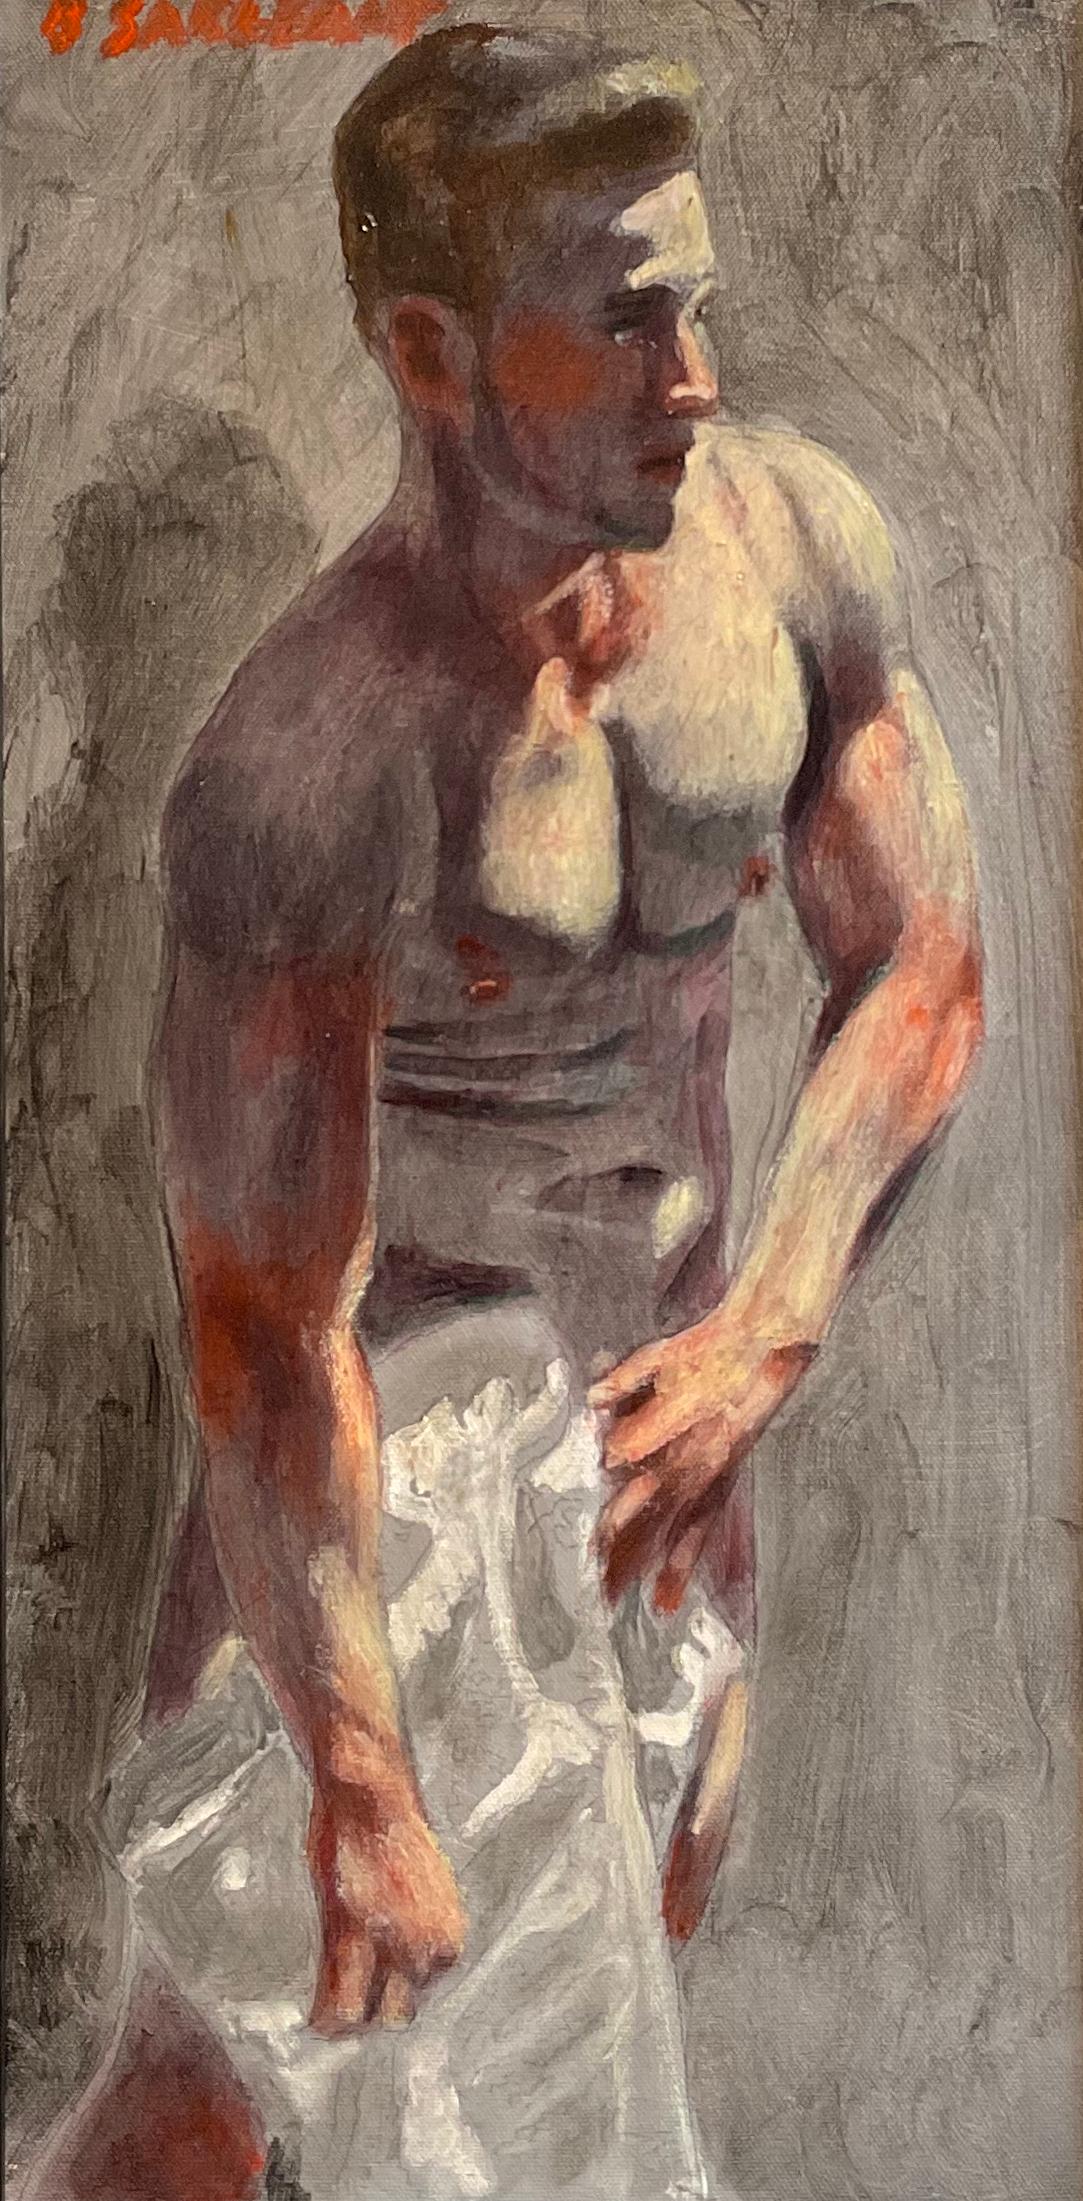 Drying Off (Figurative Nude Painting by Mark Beard as Bruce Sargeant)  1